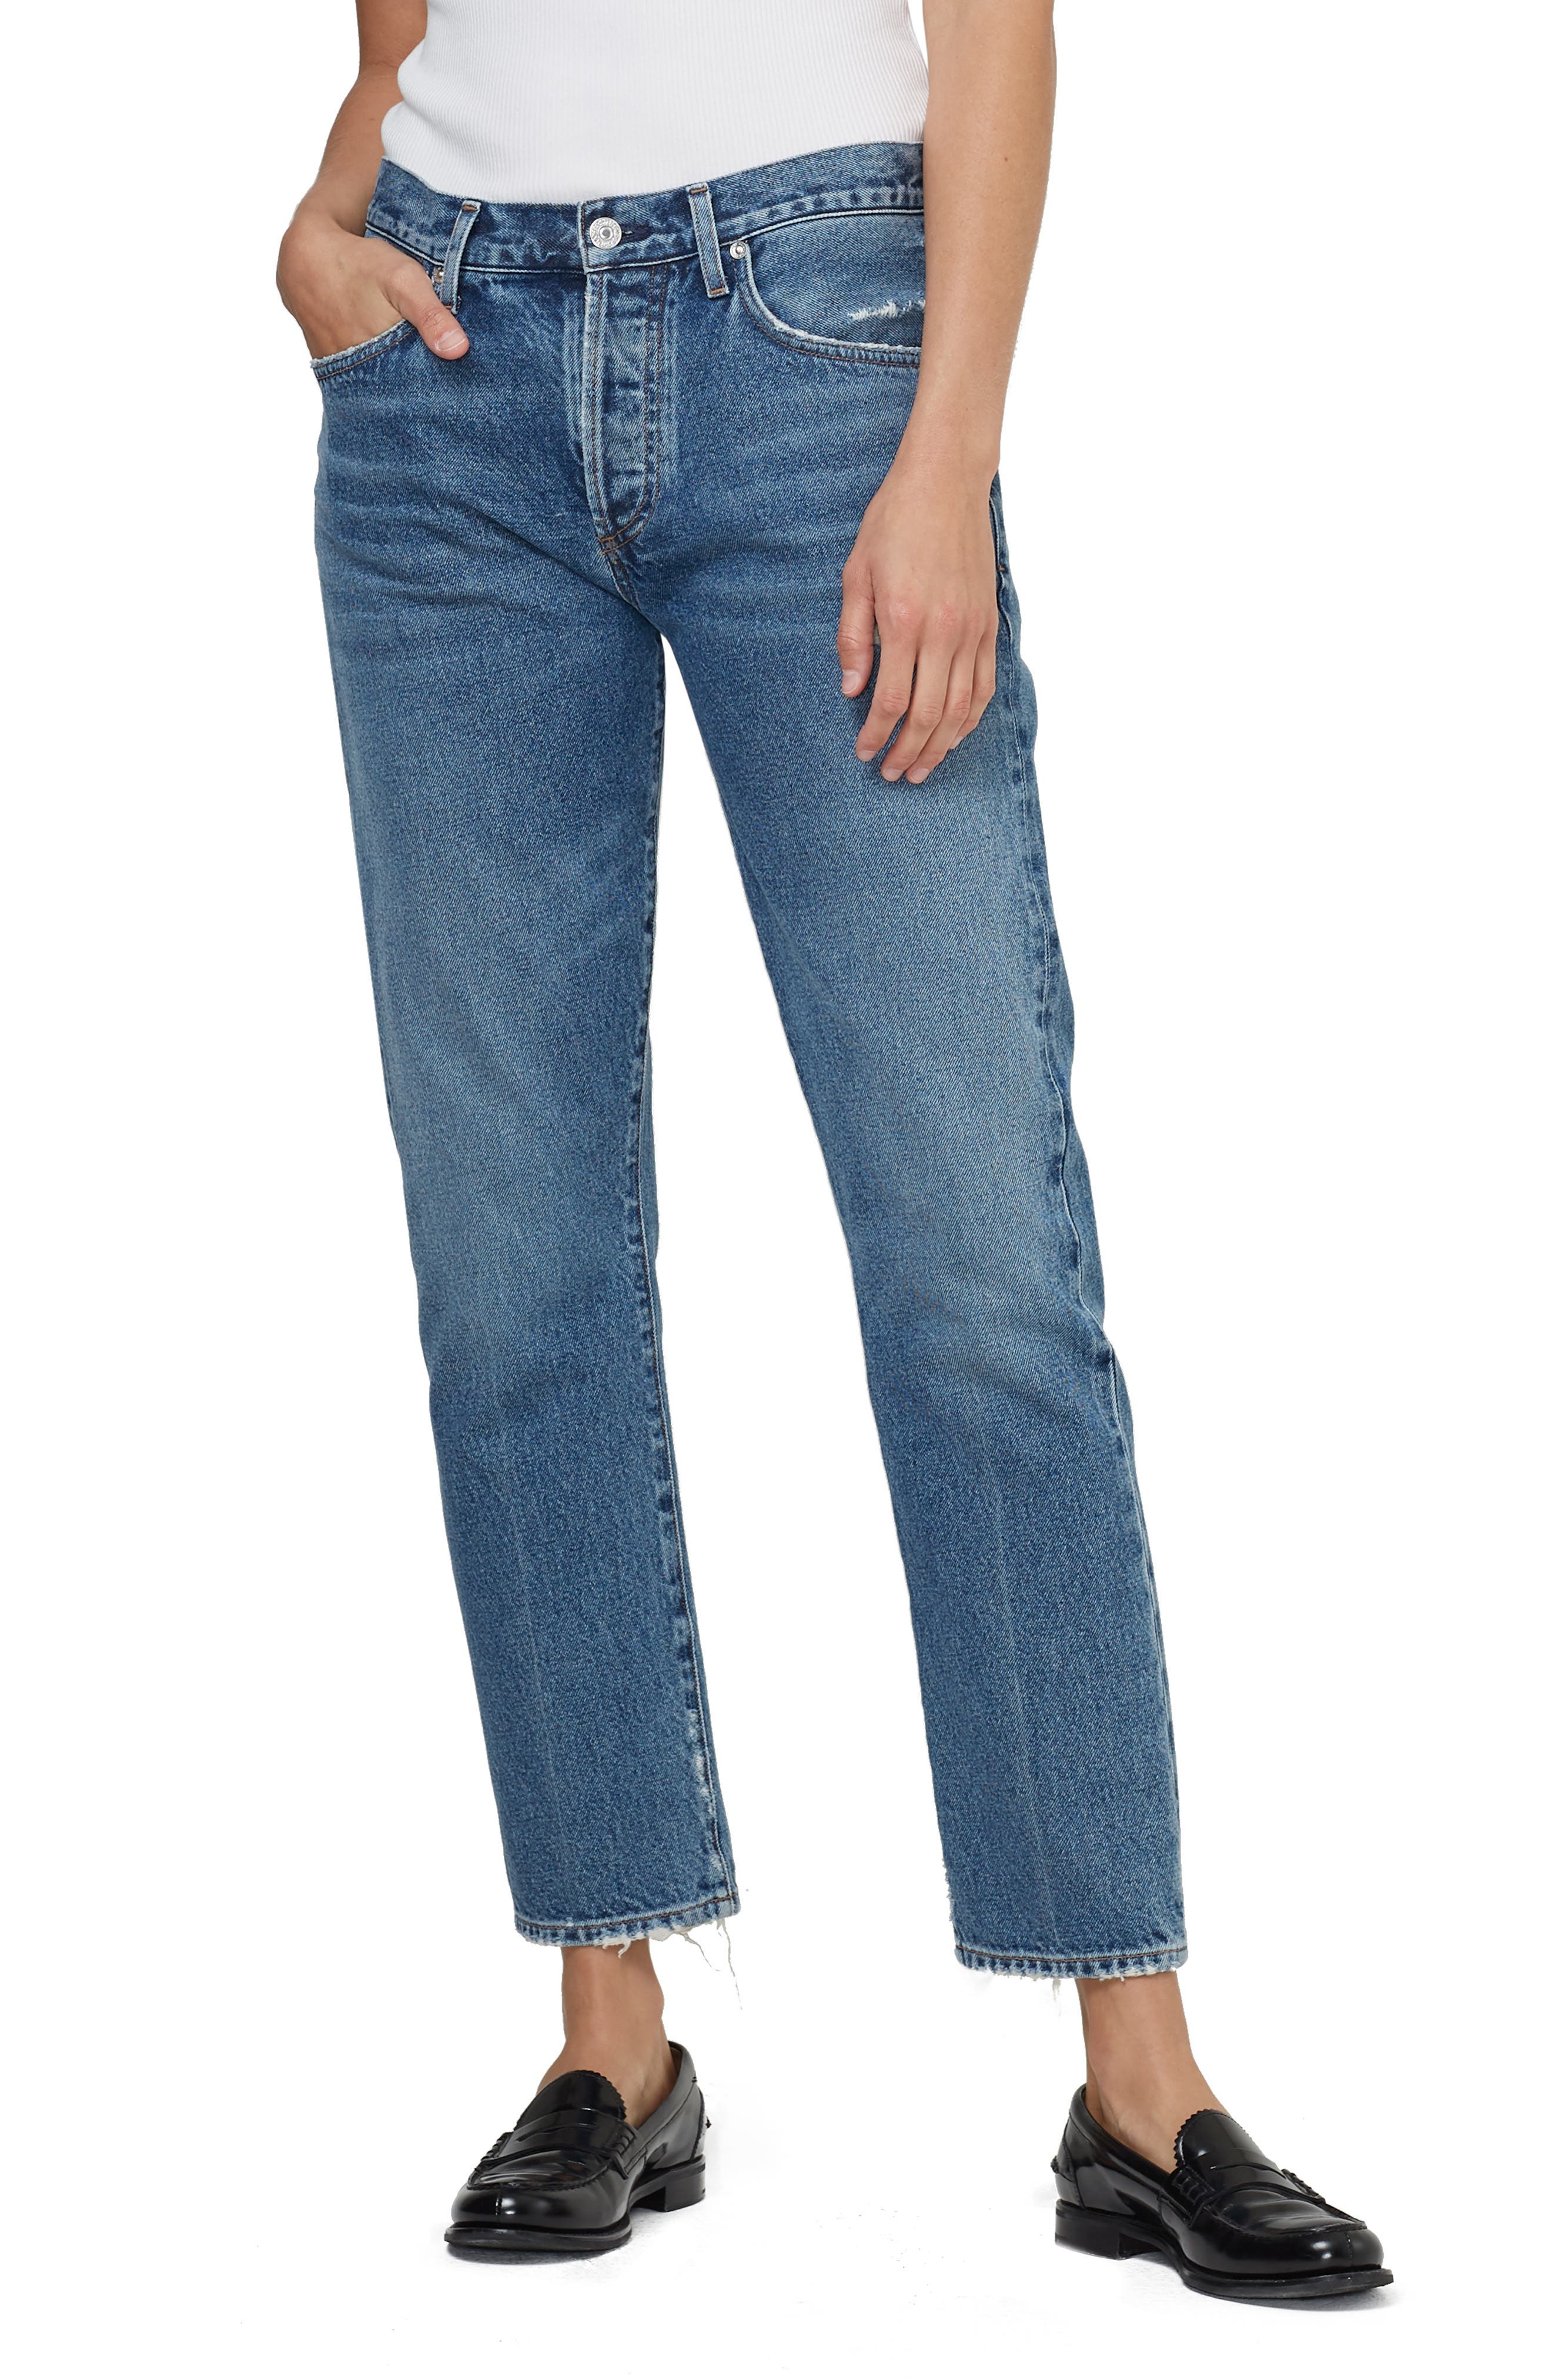 Womens Clothing Jeans Skinny jeans Citizens of Humanity Denim Trousers in Blue 